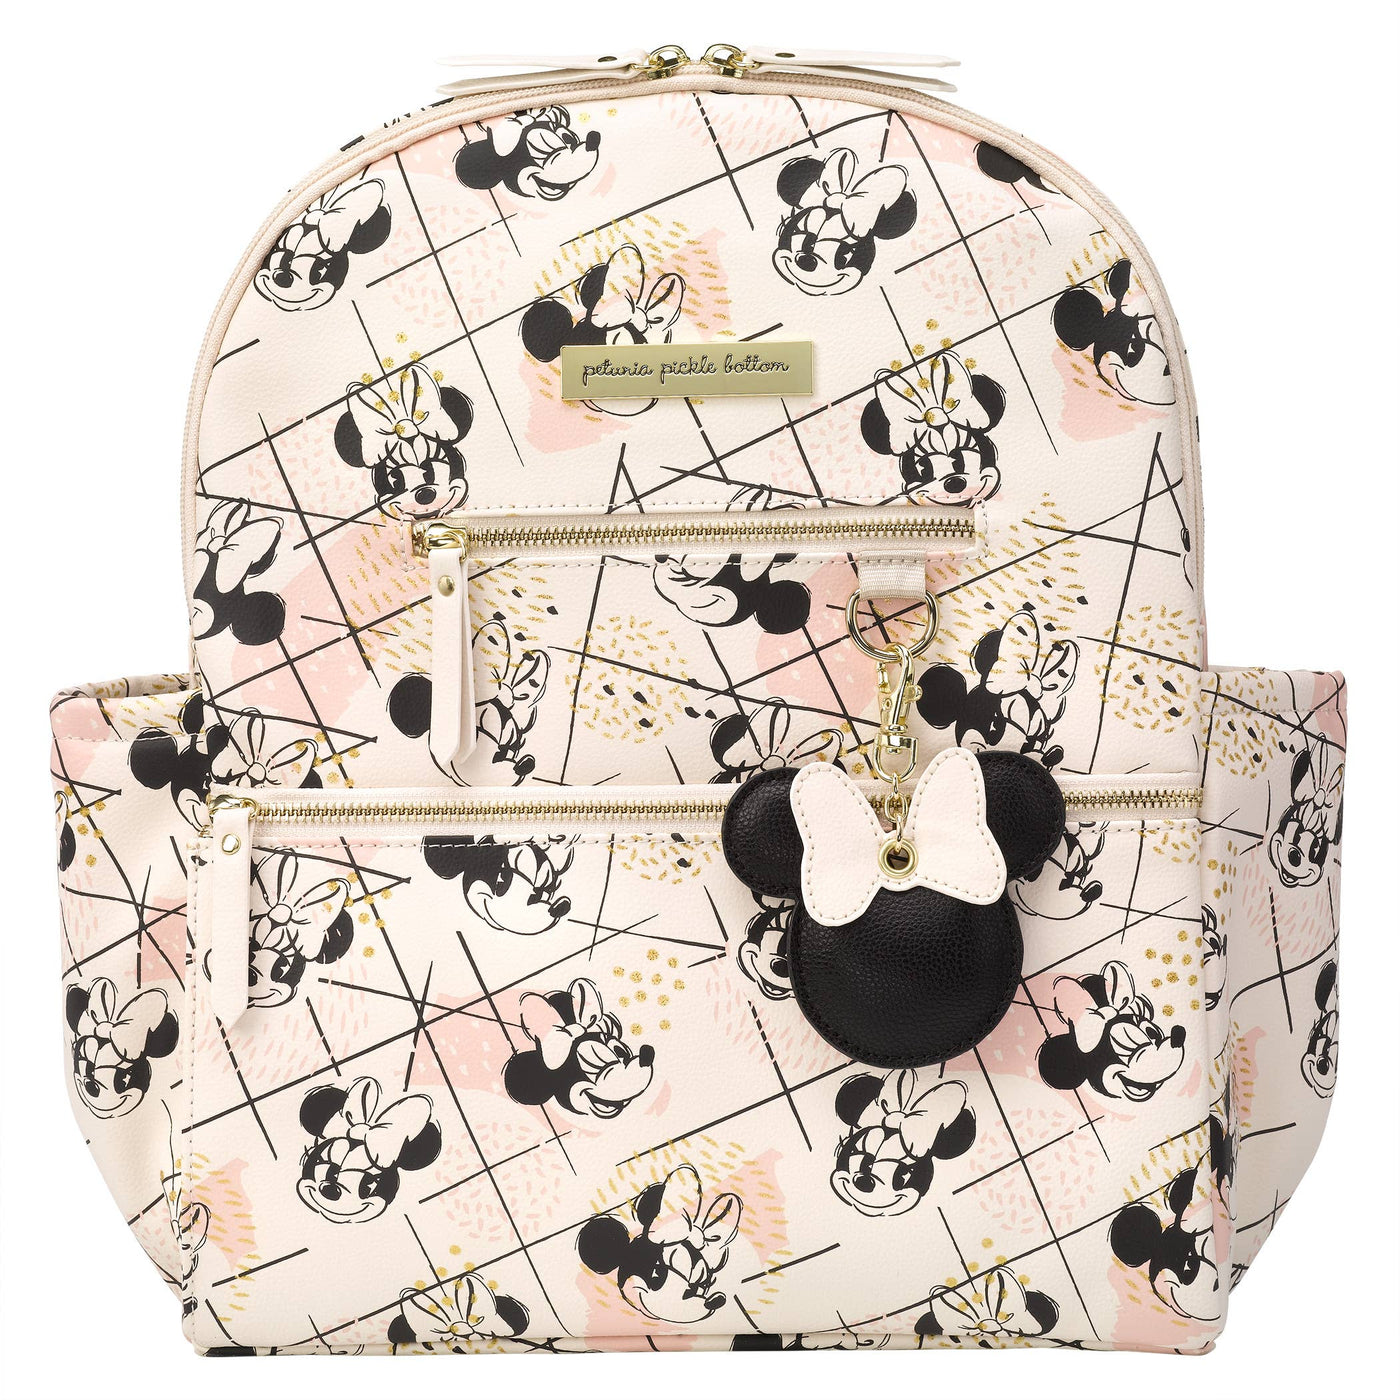 ACE BACKPACK - SHIMMERY MINNIE MOUSE  FINAL SALE